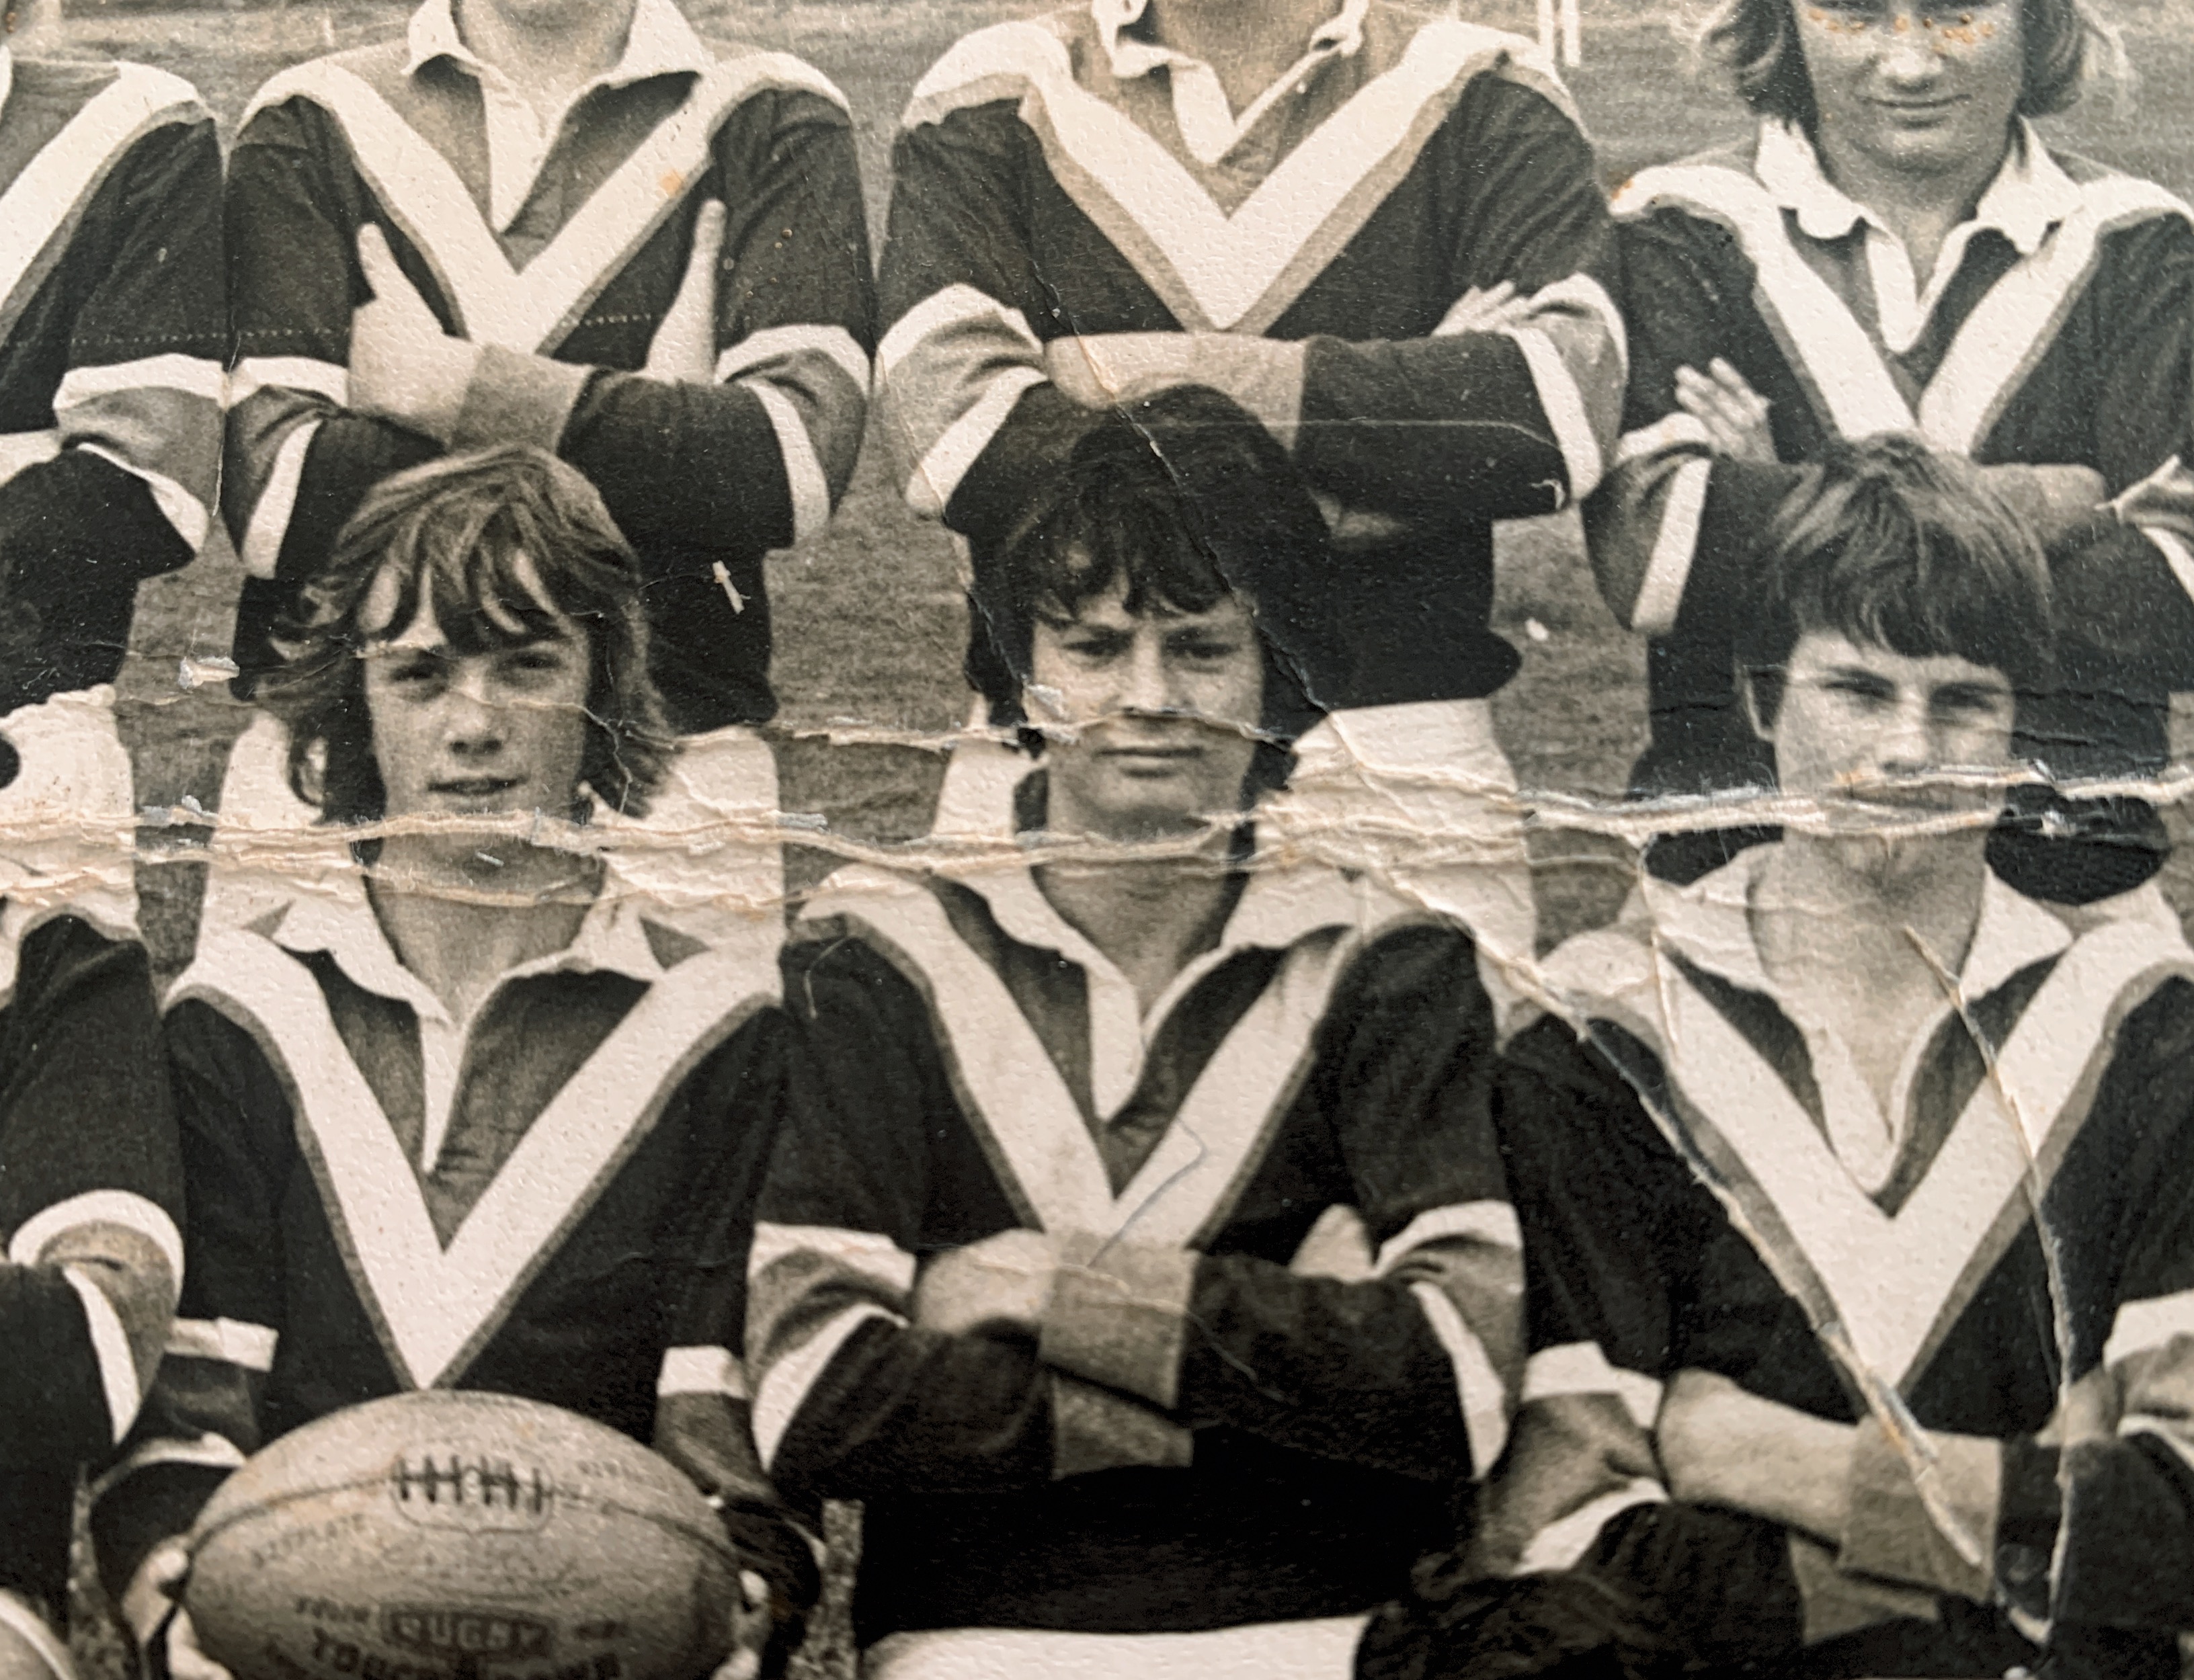 Tony McPhail on left, Mike Jarvis centre, Brian Wostikow on right 1973